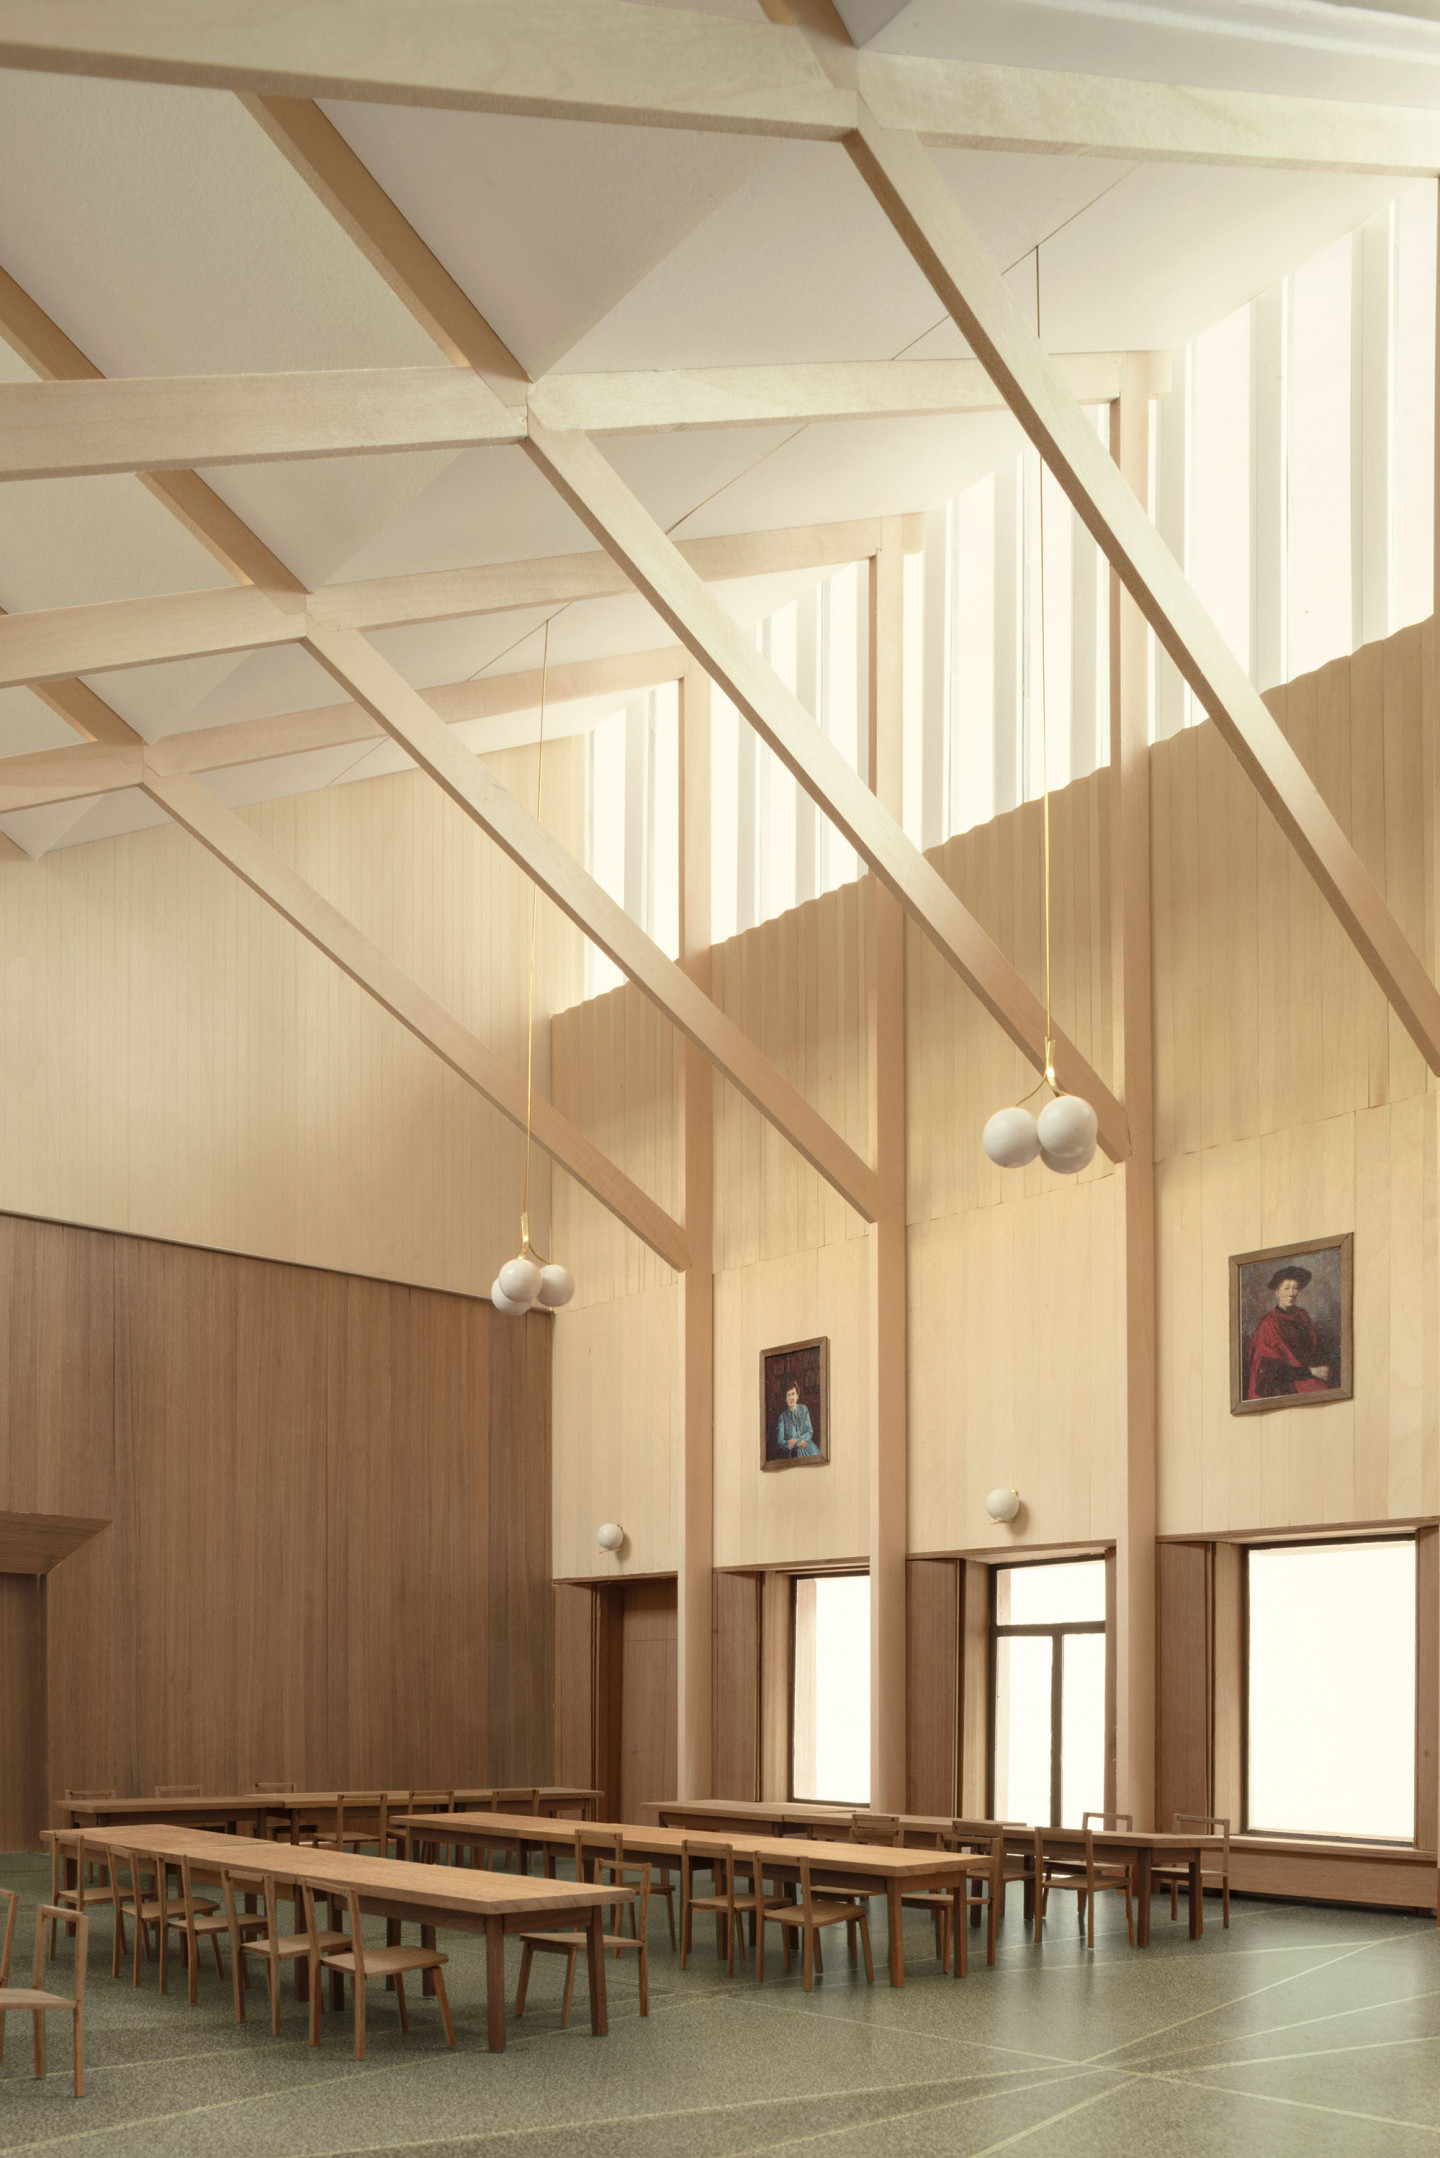 Interior Study Model, New Dining Hall, Homerton College, Cambridge by Feilden Fowles Architects, made from softwood ply, walnut sheet, printed paper and brass.